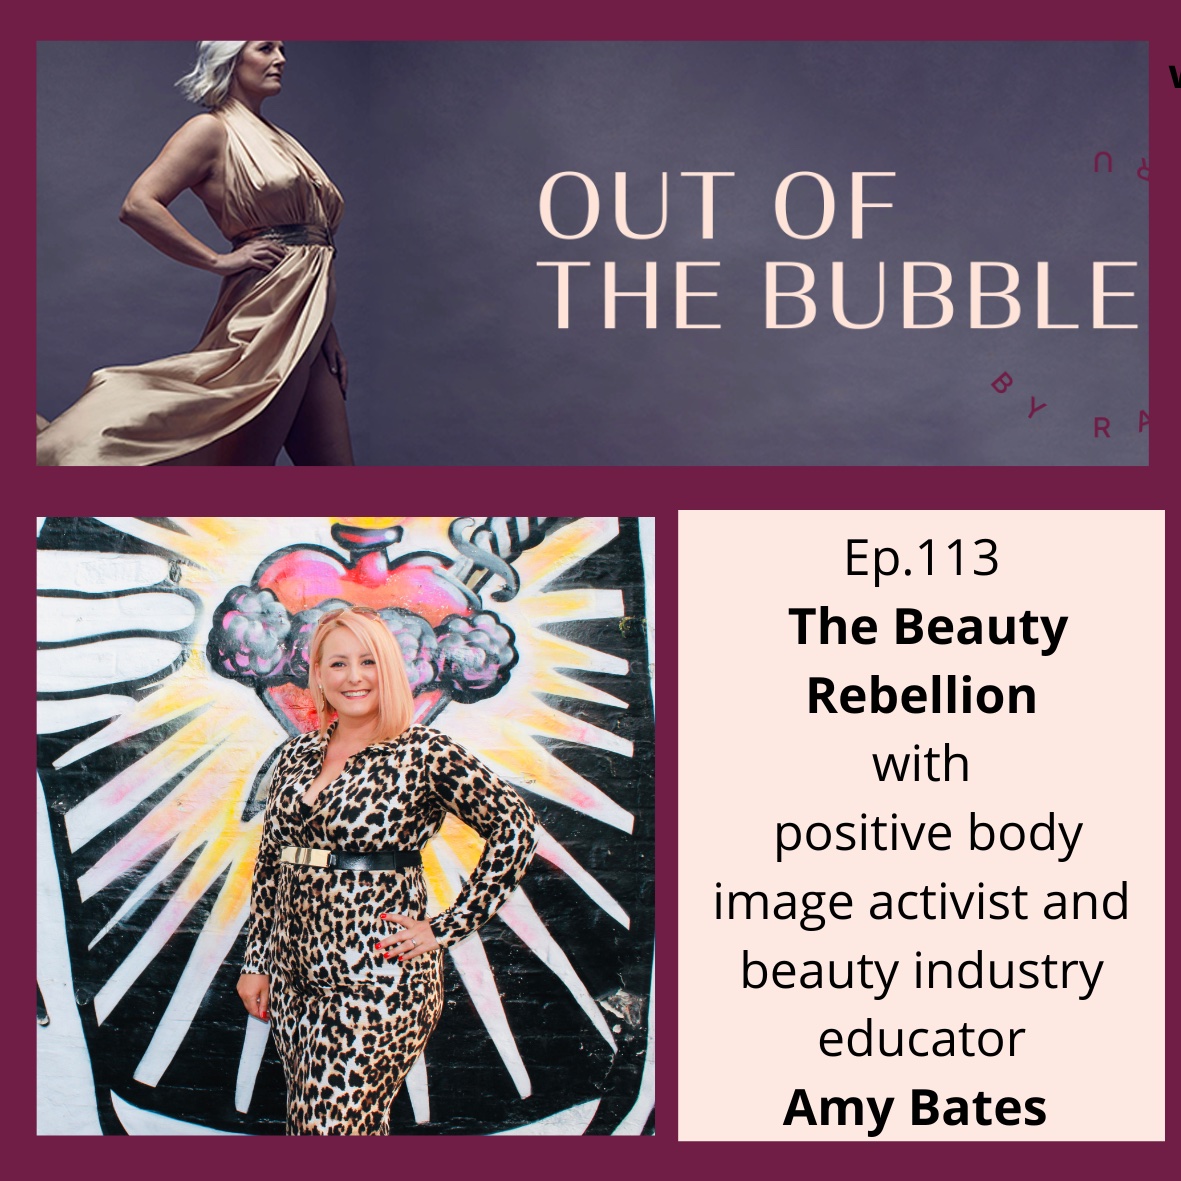 Ep.113 The Beauty Rebellion with positive body image activist, Amy Bates.